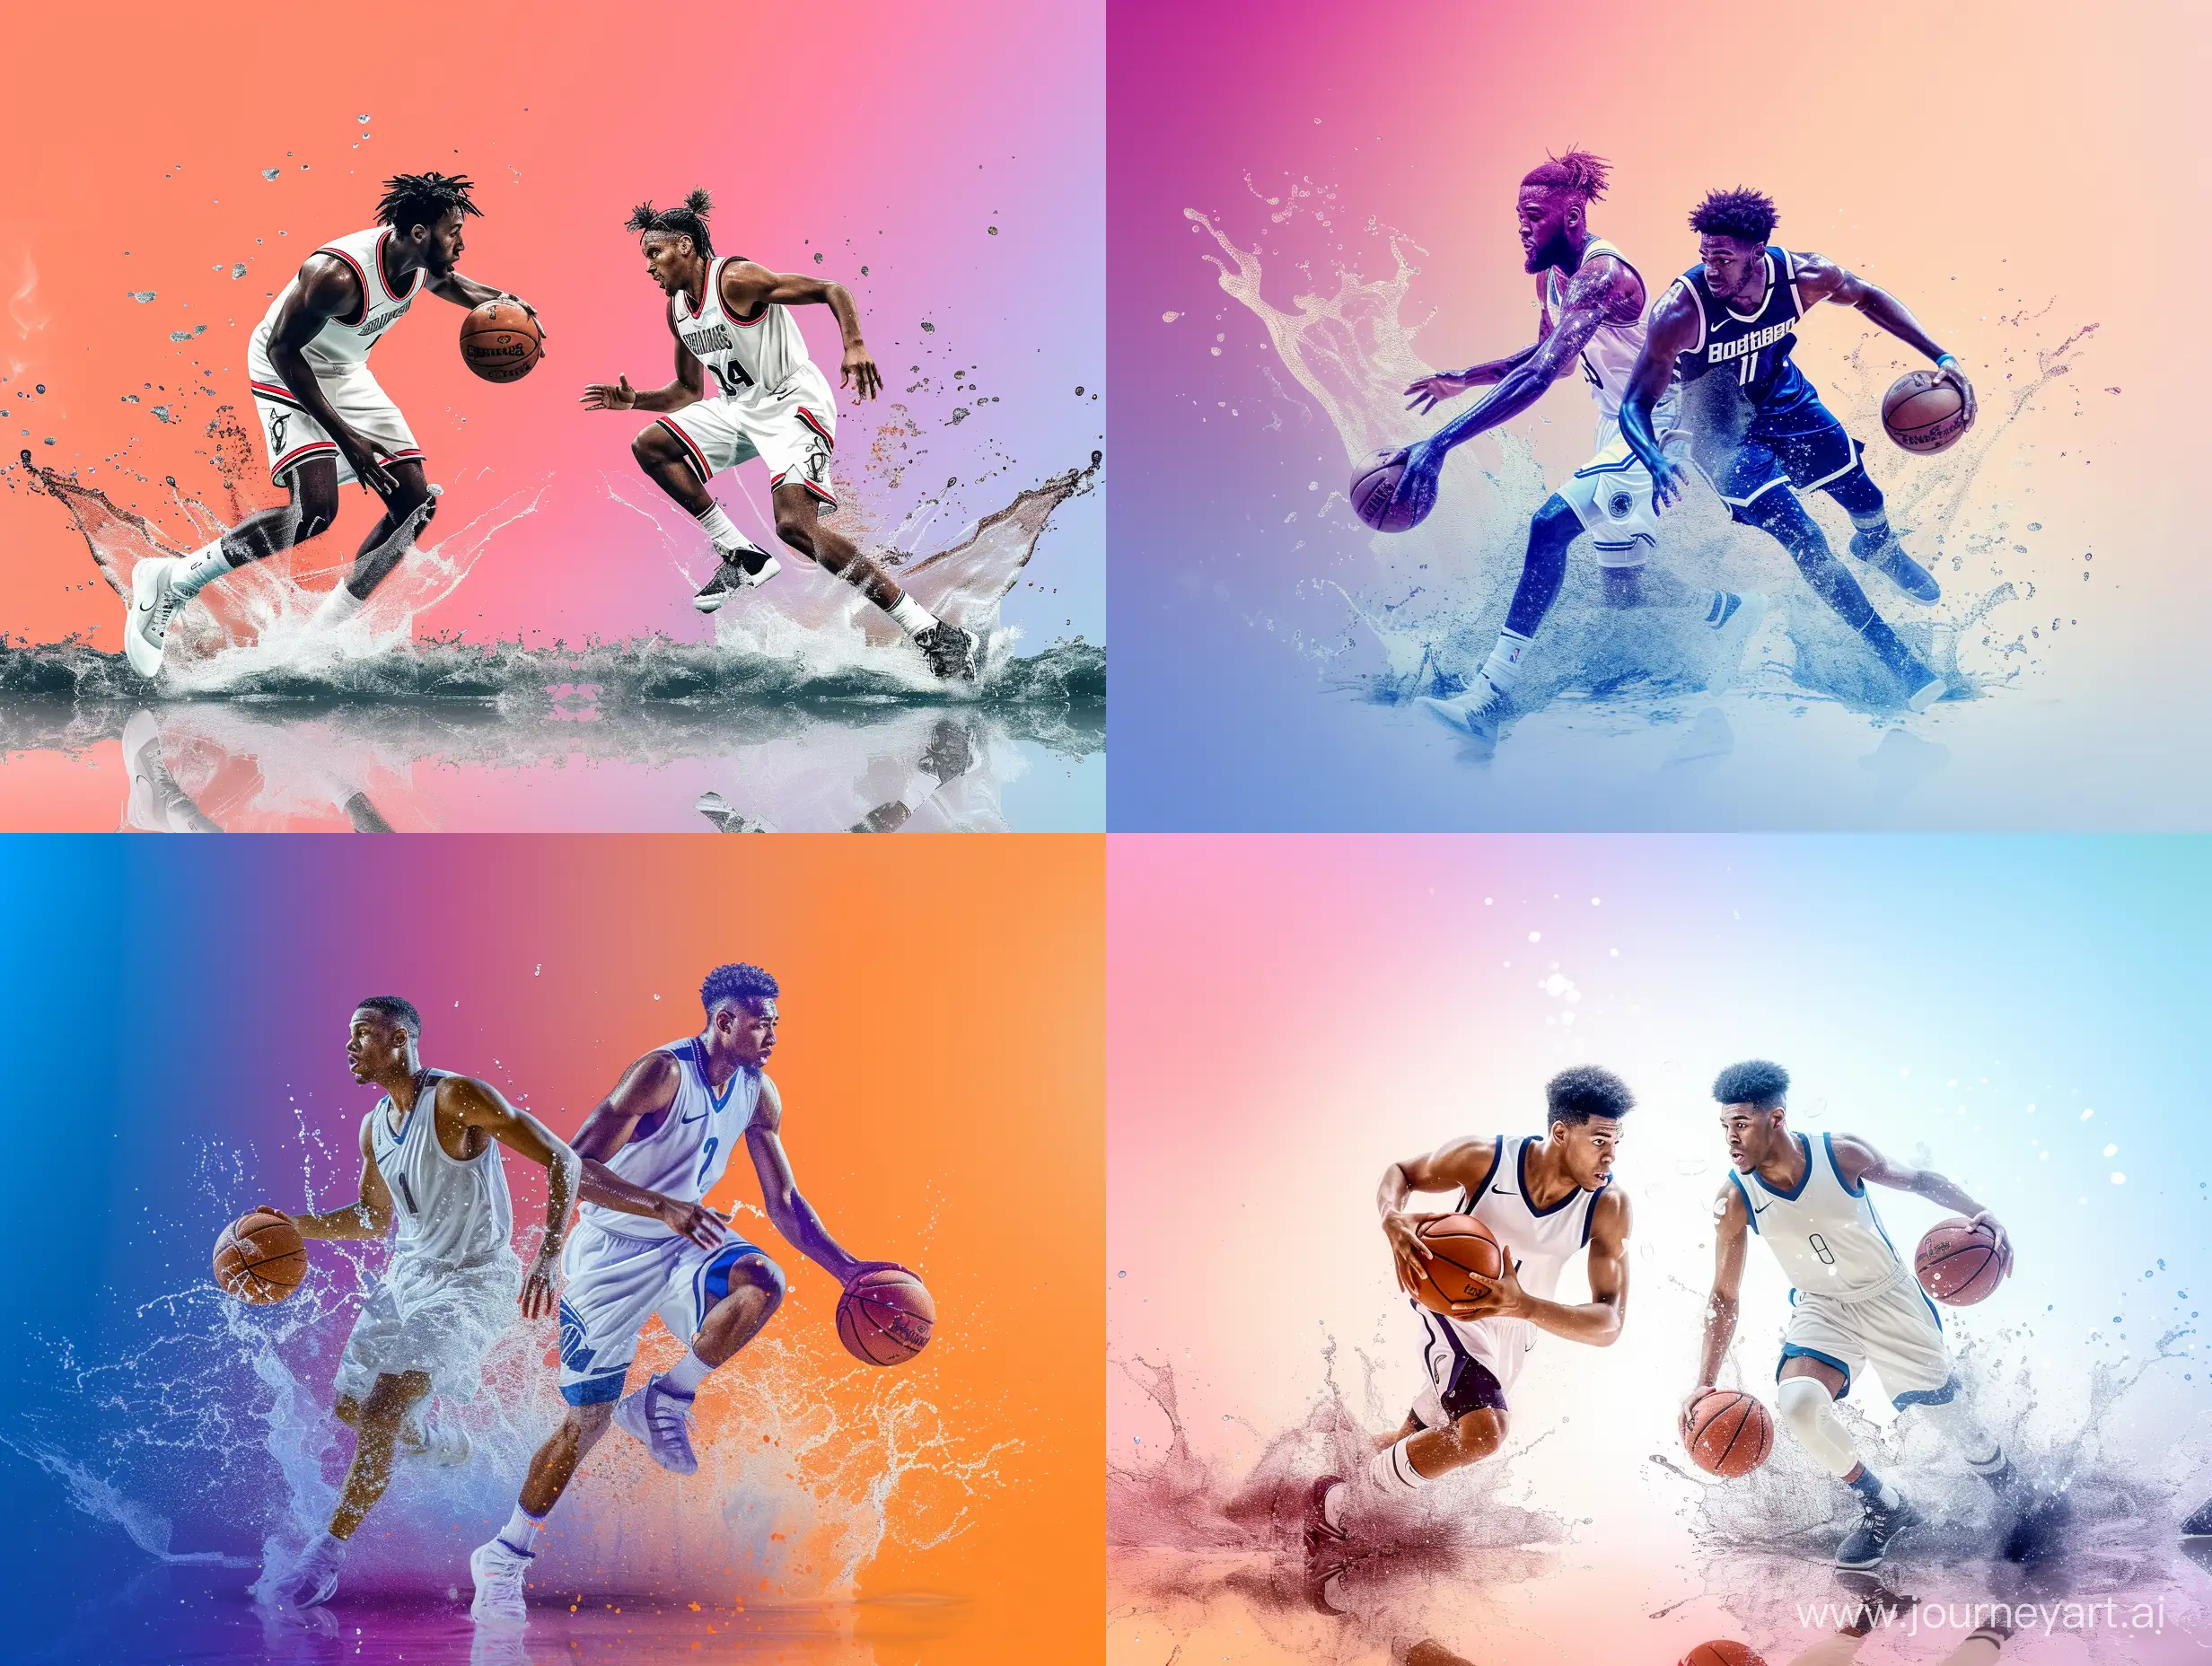 Intense-Basketball-Duel-on-Vibrant-Gradient-Background-with-Water-Splashes-and-Subtle-Smoke